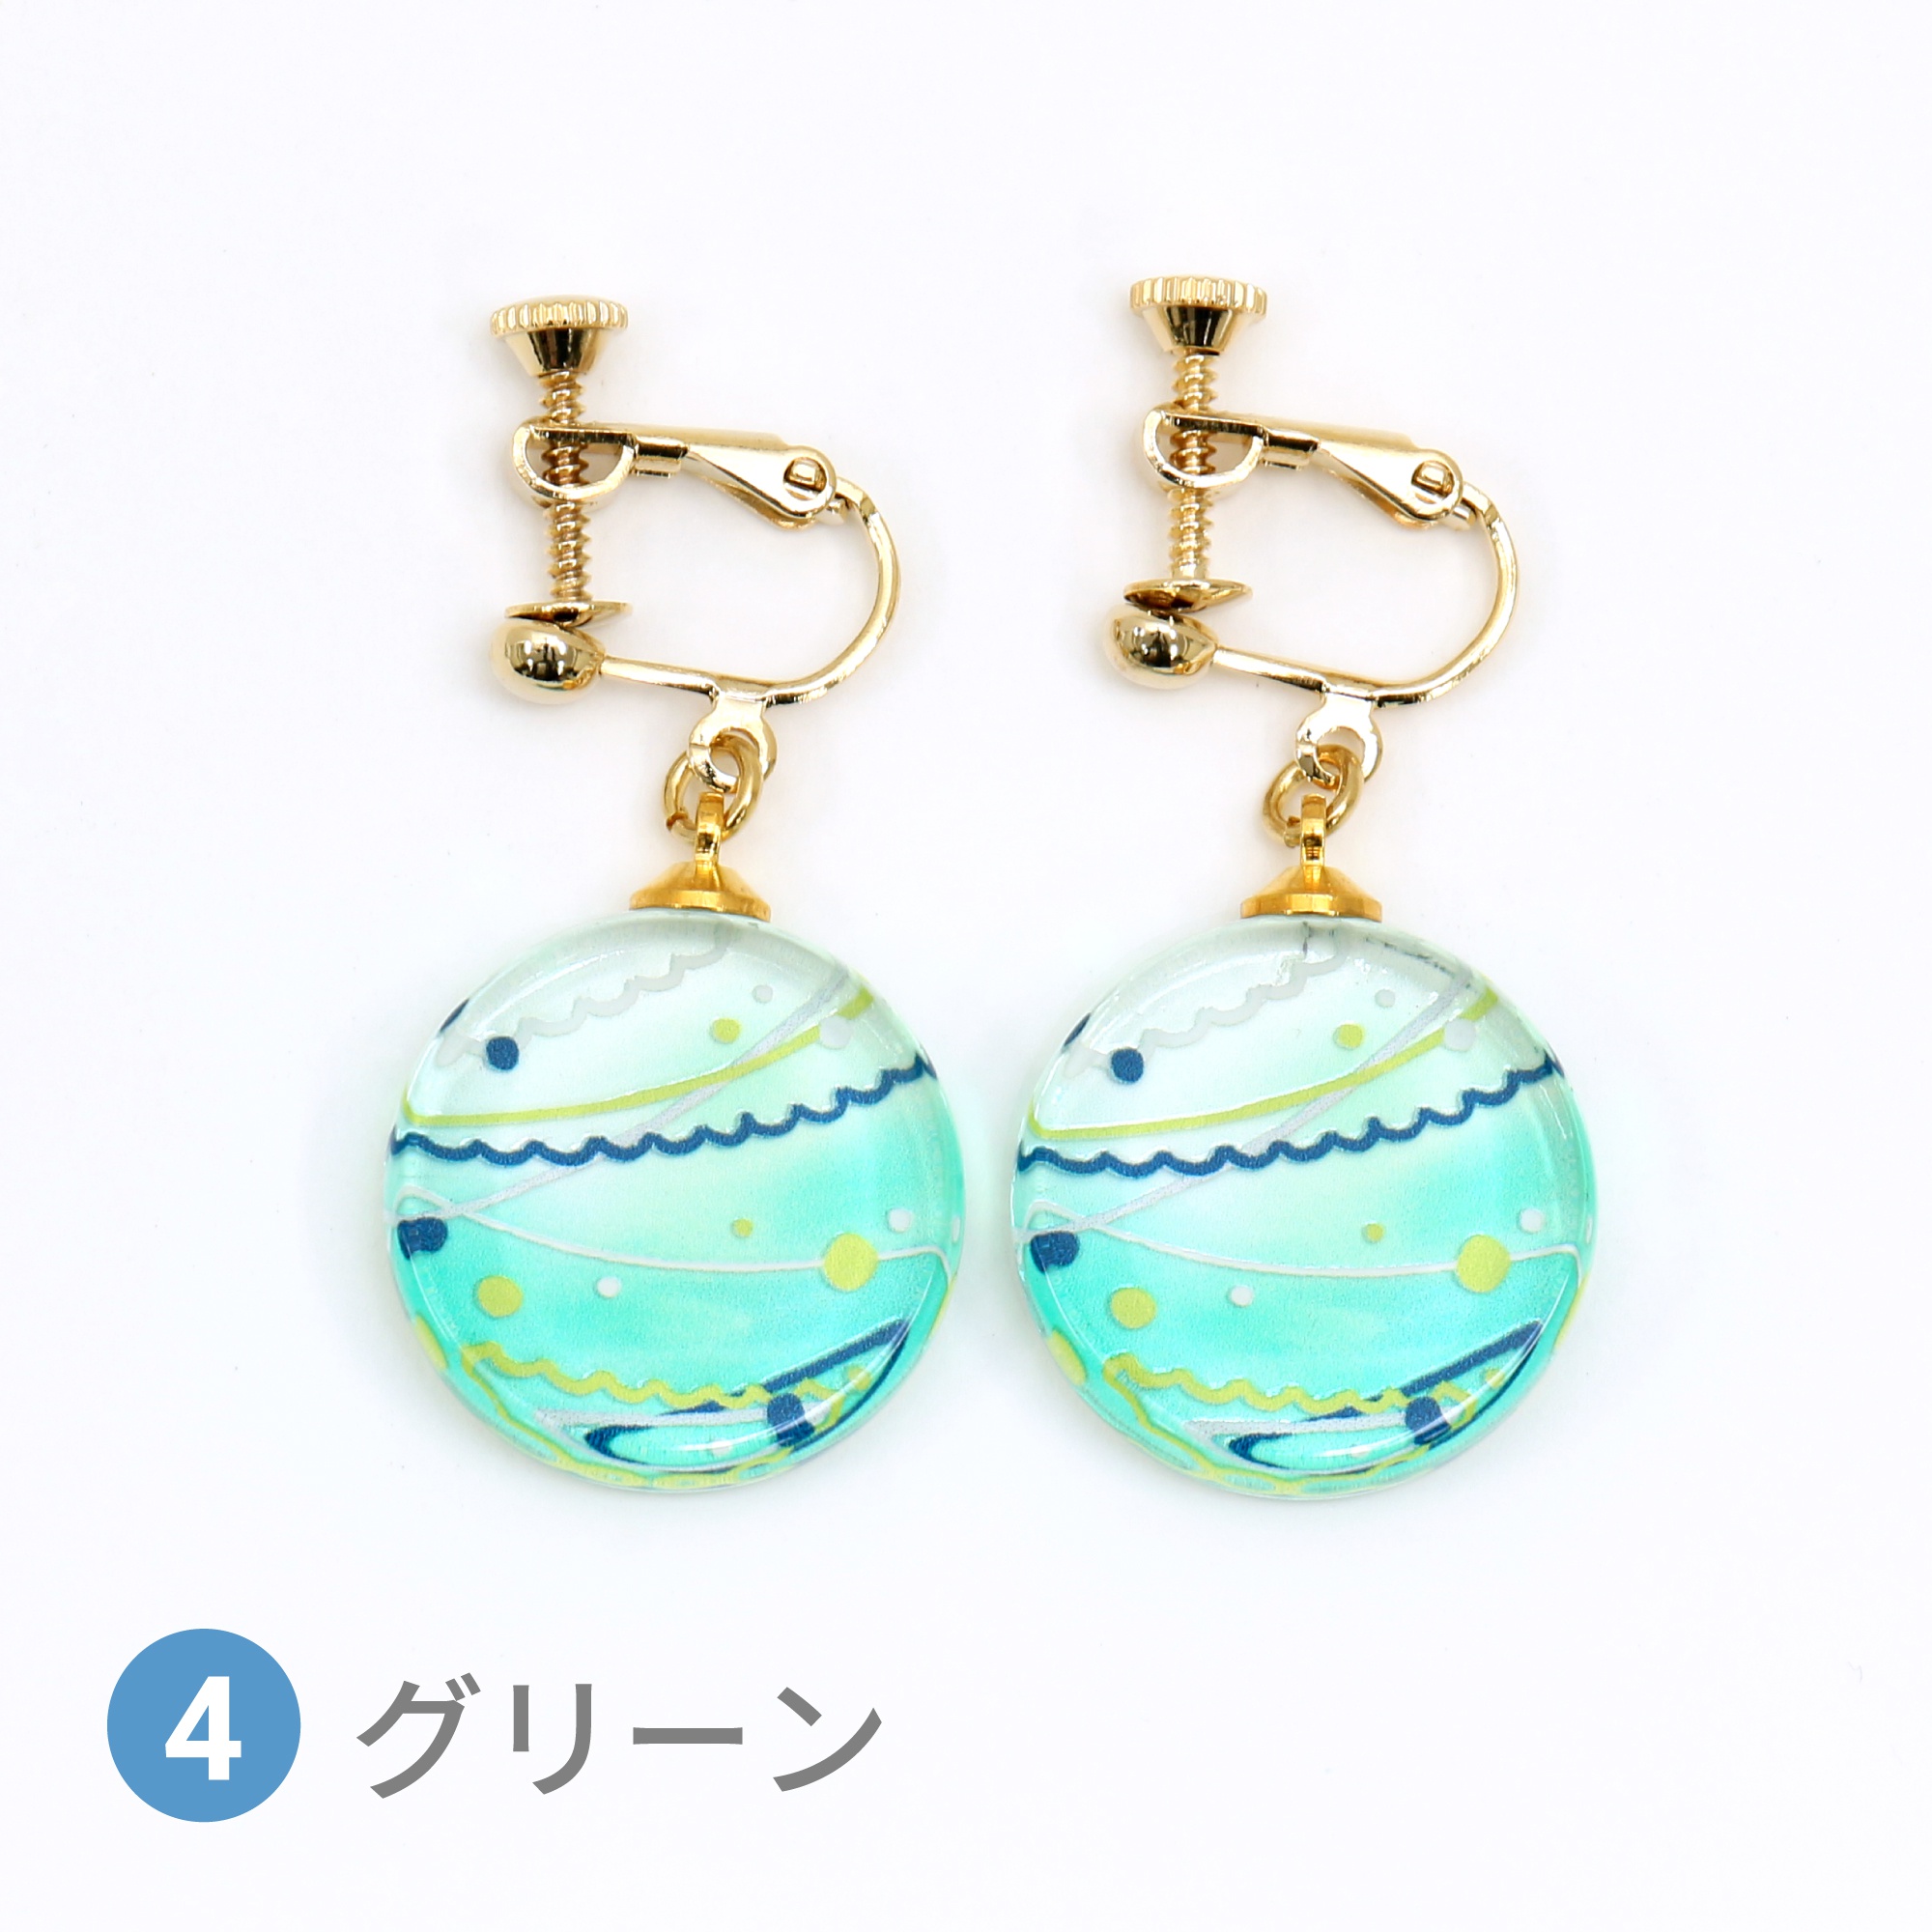 Glass accessories Earring WATER BALLOON green round shape